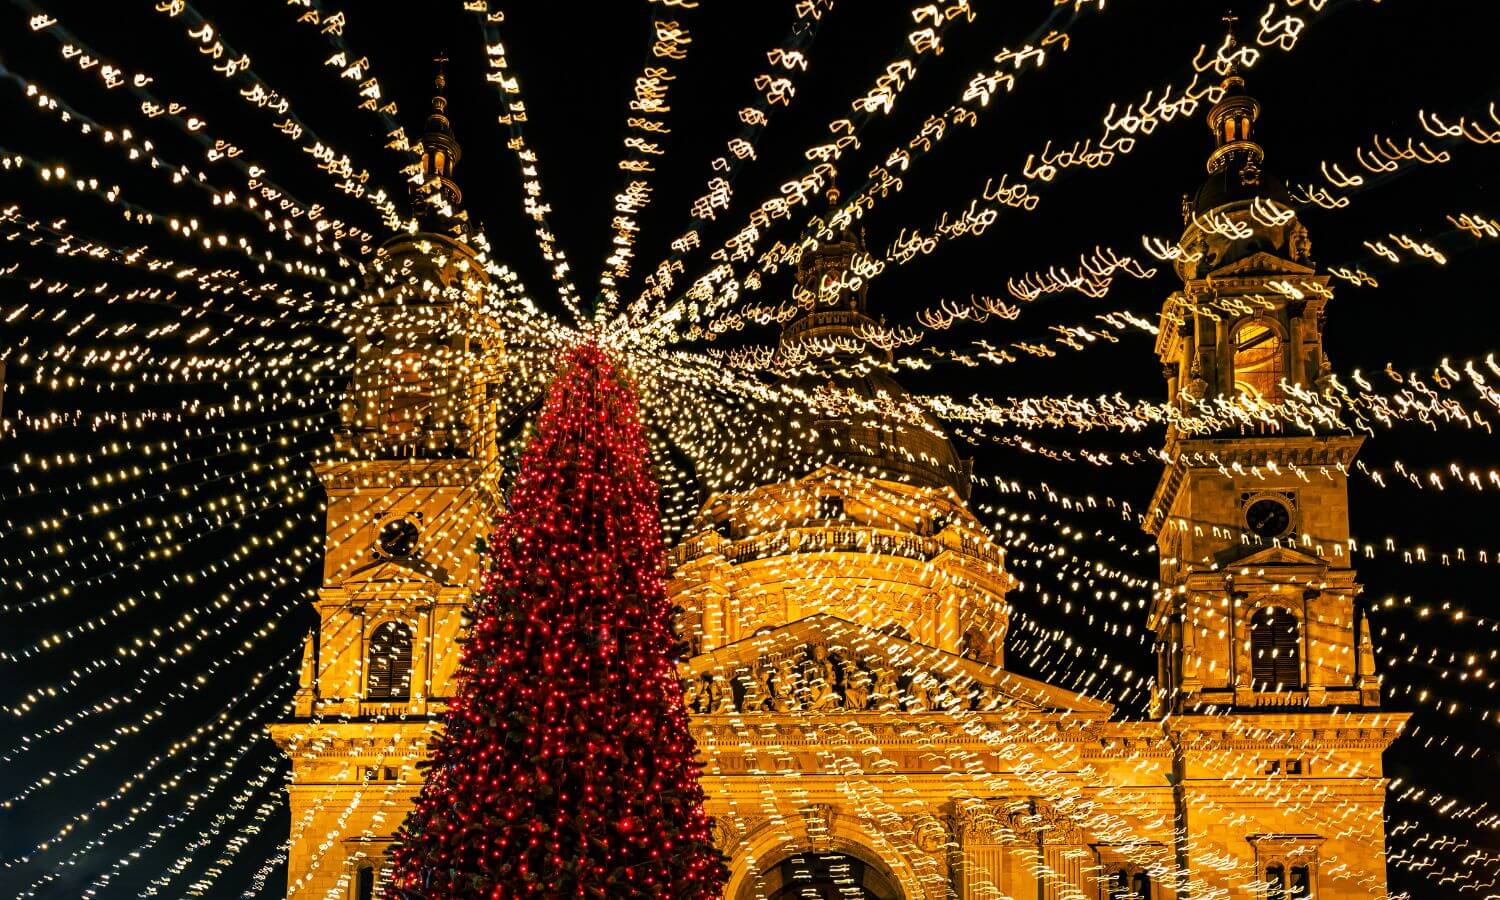 Pretty Christmas Lights in Mexico in front of a church.